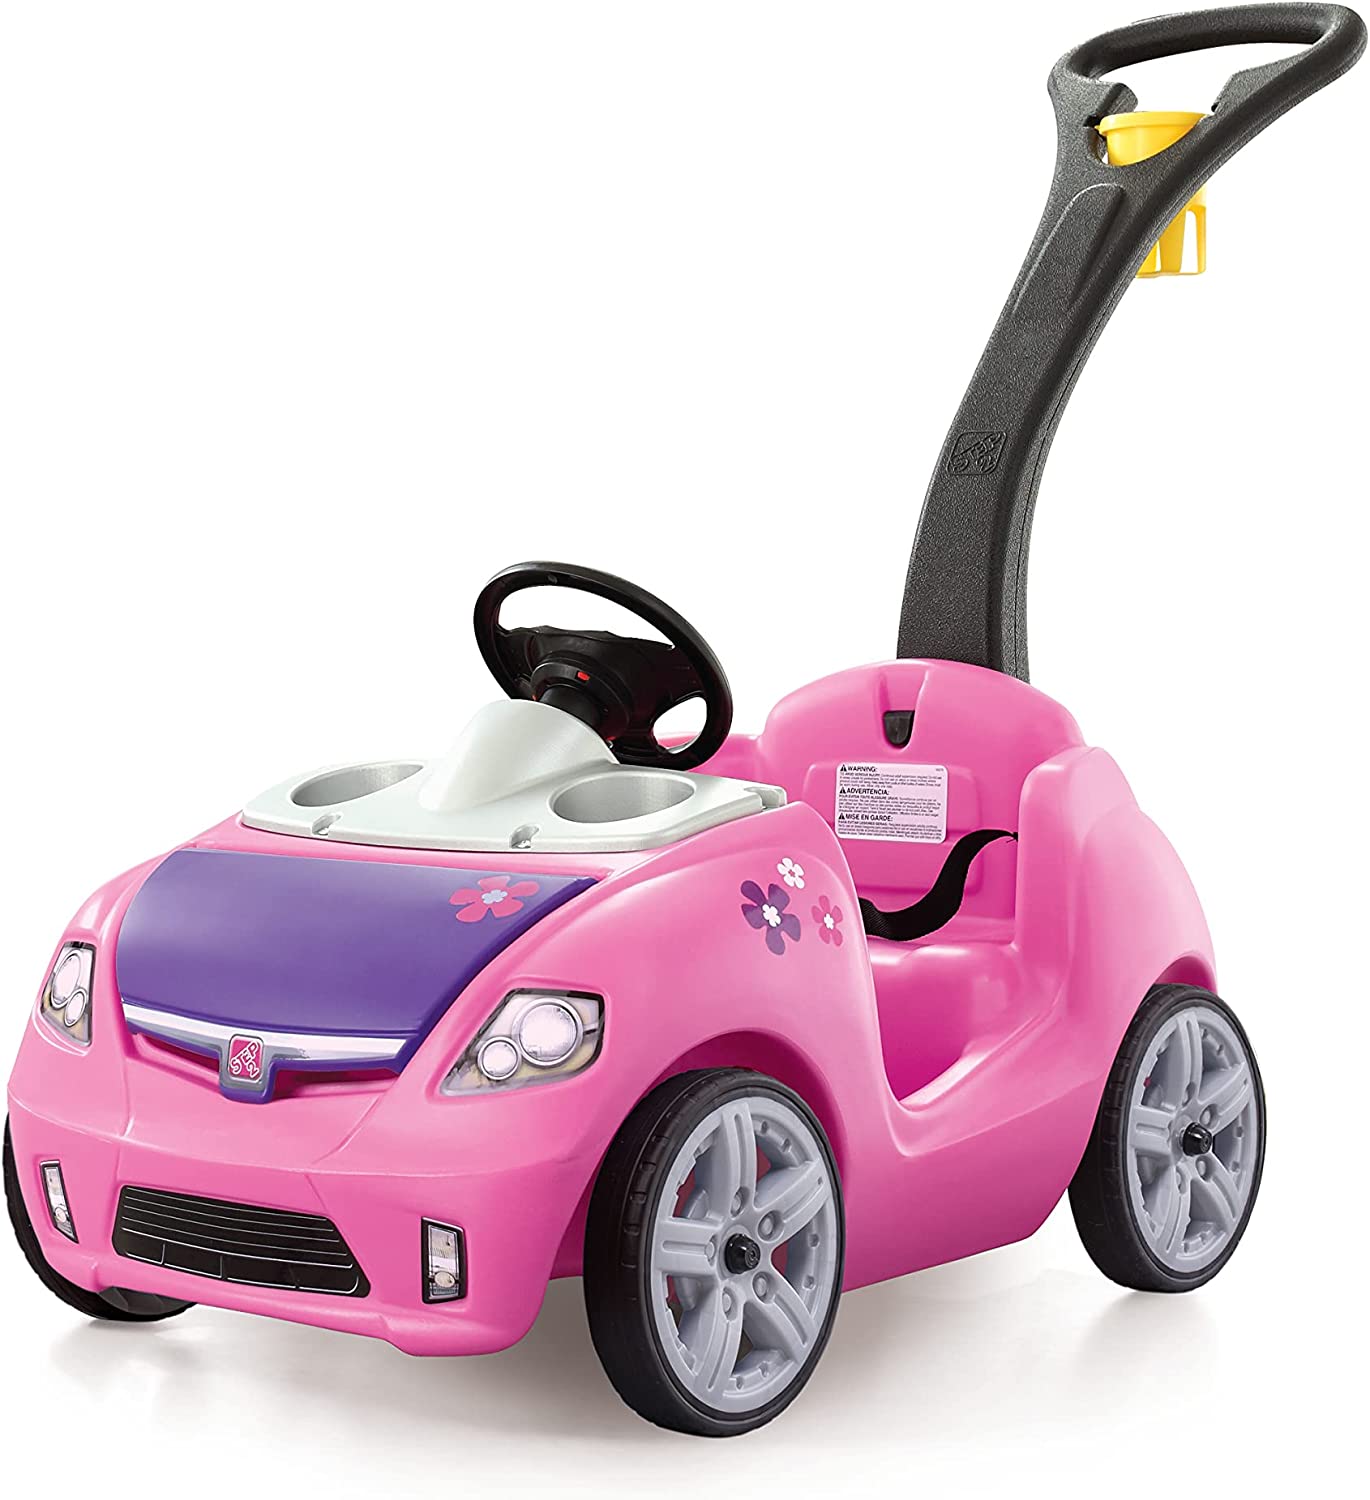 Ride On Push Toy Car For First Birthday Gift